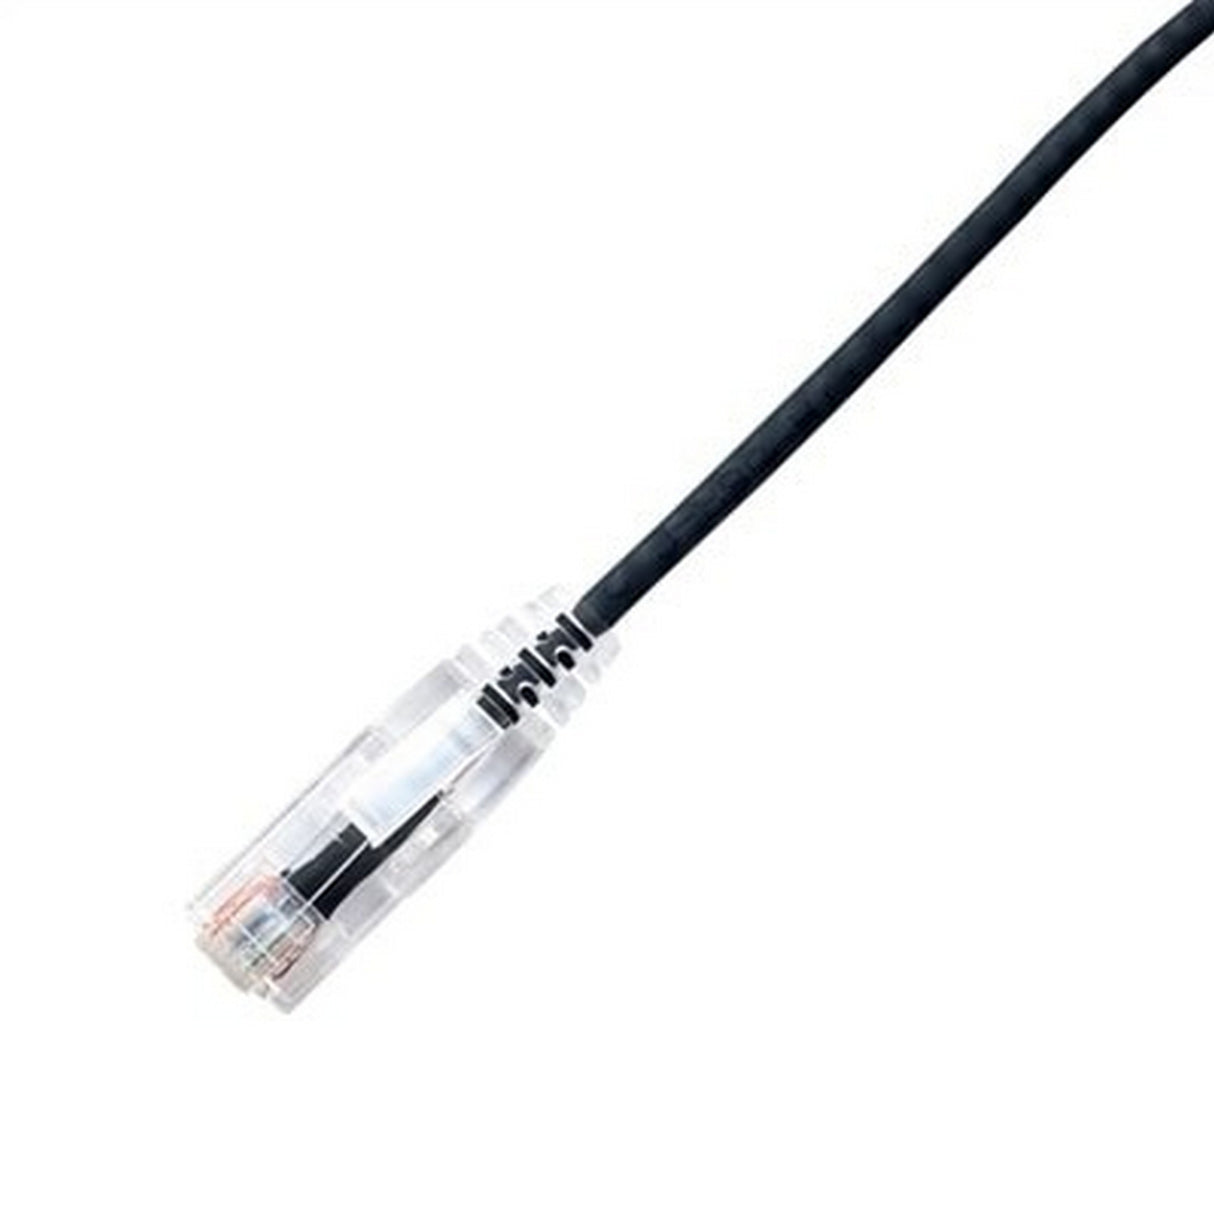 LYNN CPCS-ABK-005F CHOICE Slim 28AWG CAT6A Ethernet Patch Cable, 5-Foot, Black